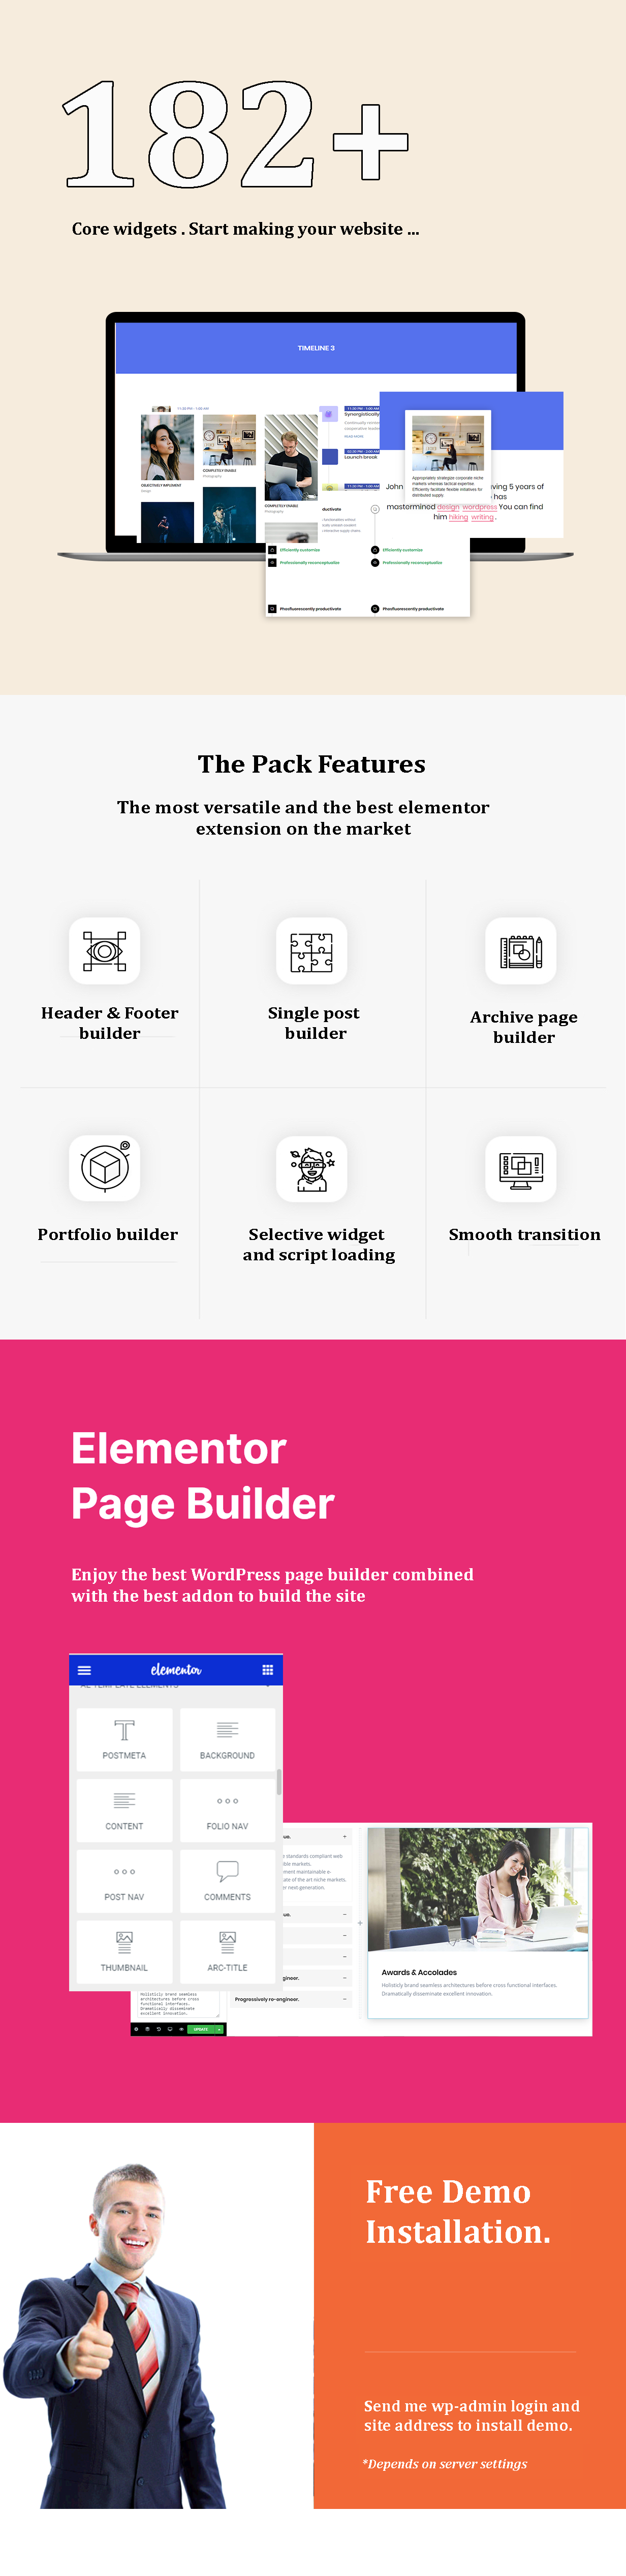 The Pack - Elementor Page Builder Addon - 3